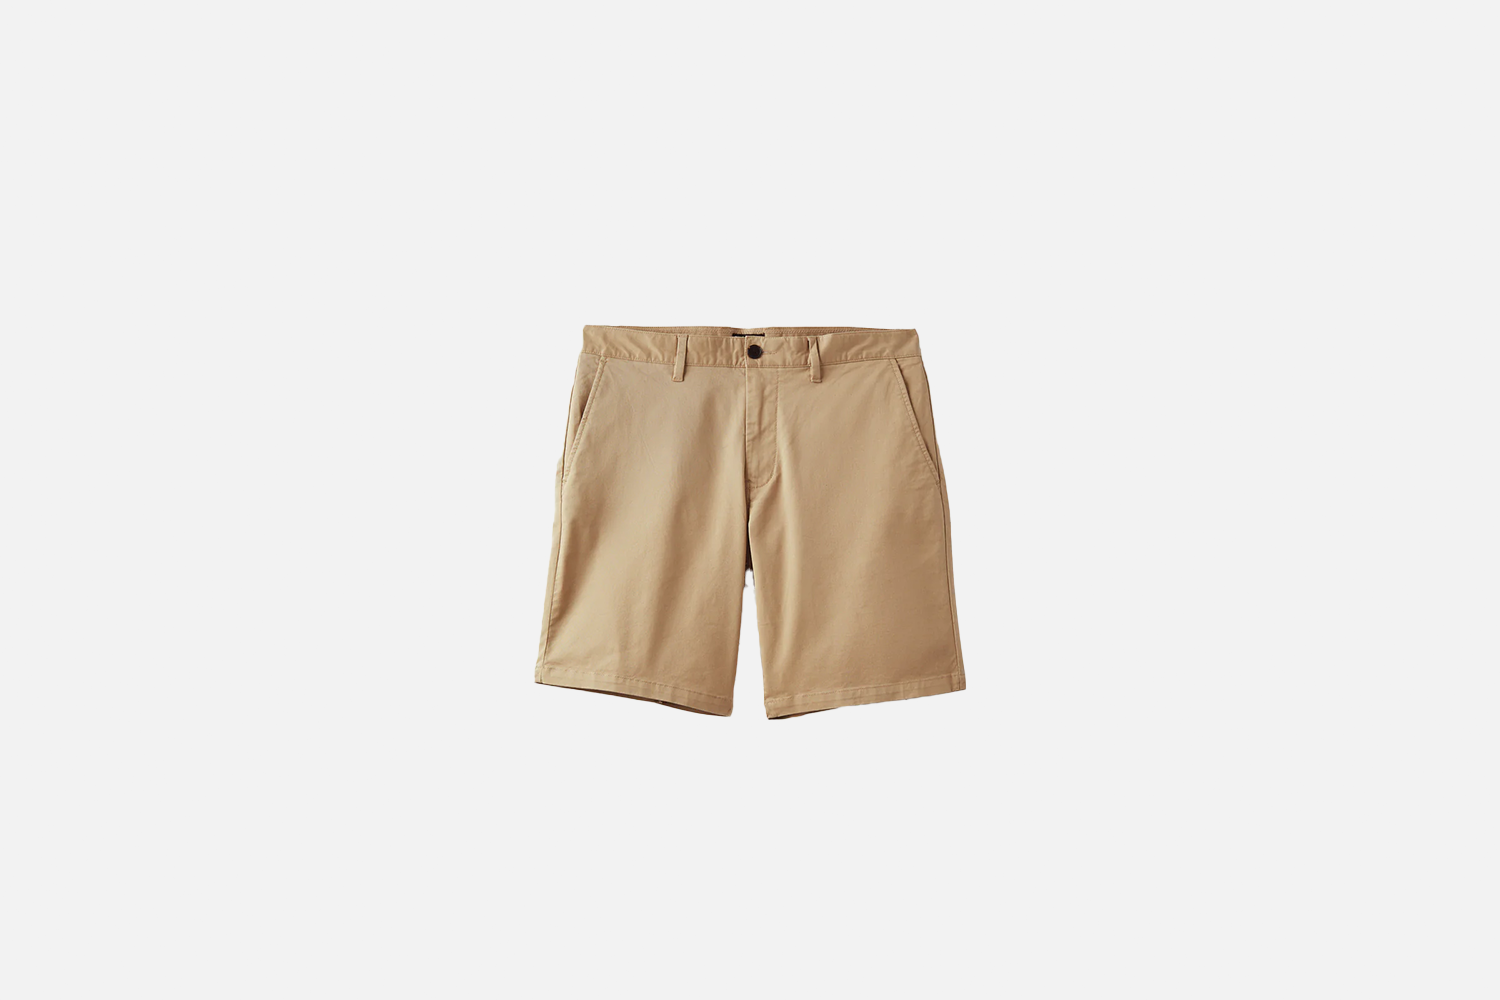 Frank And Oak The Brunswick Chino Slim Fit 9in Short